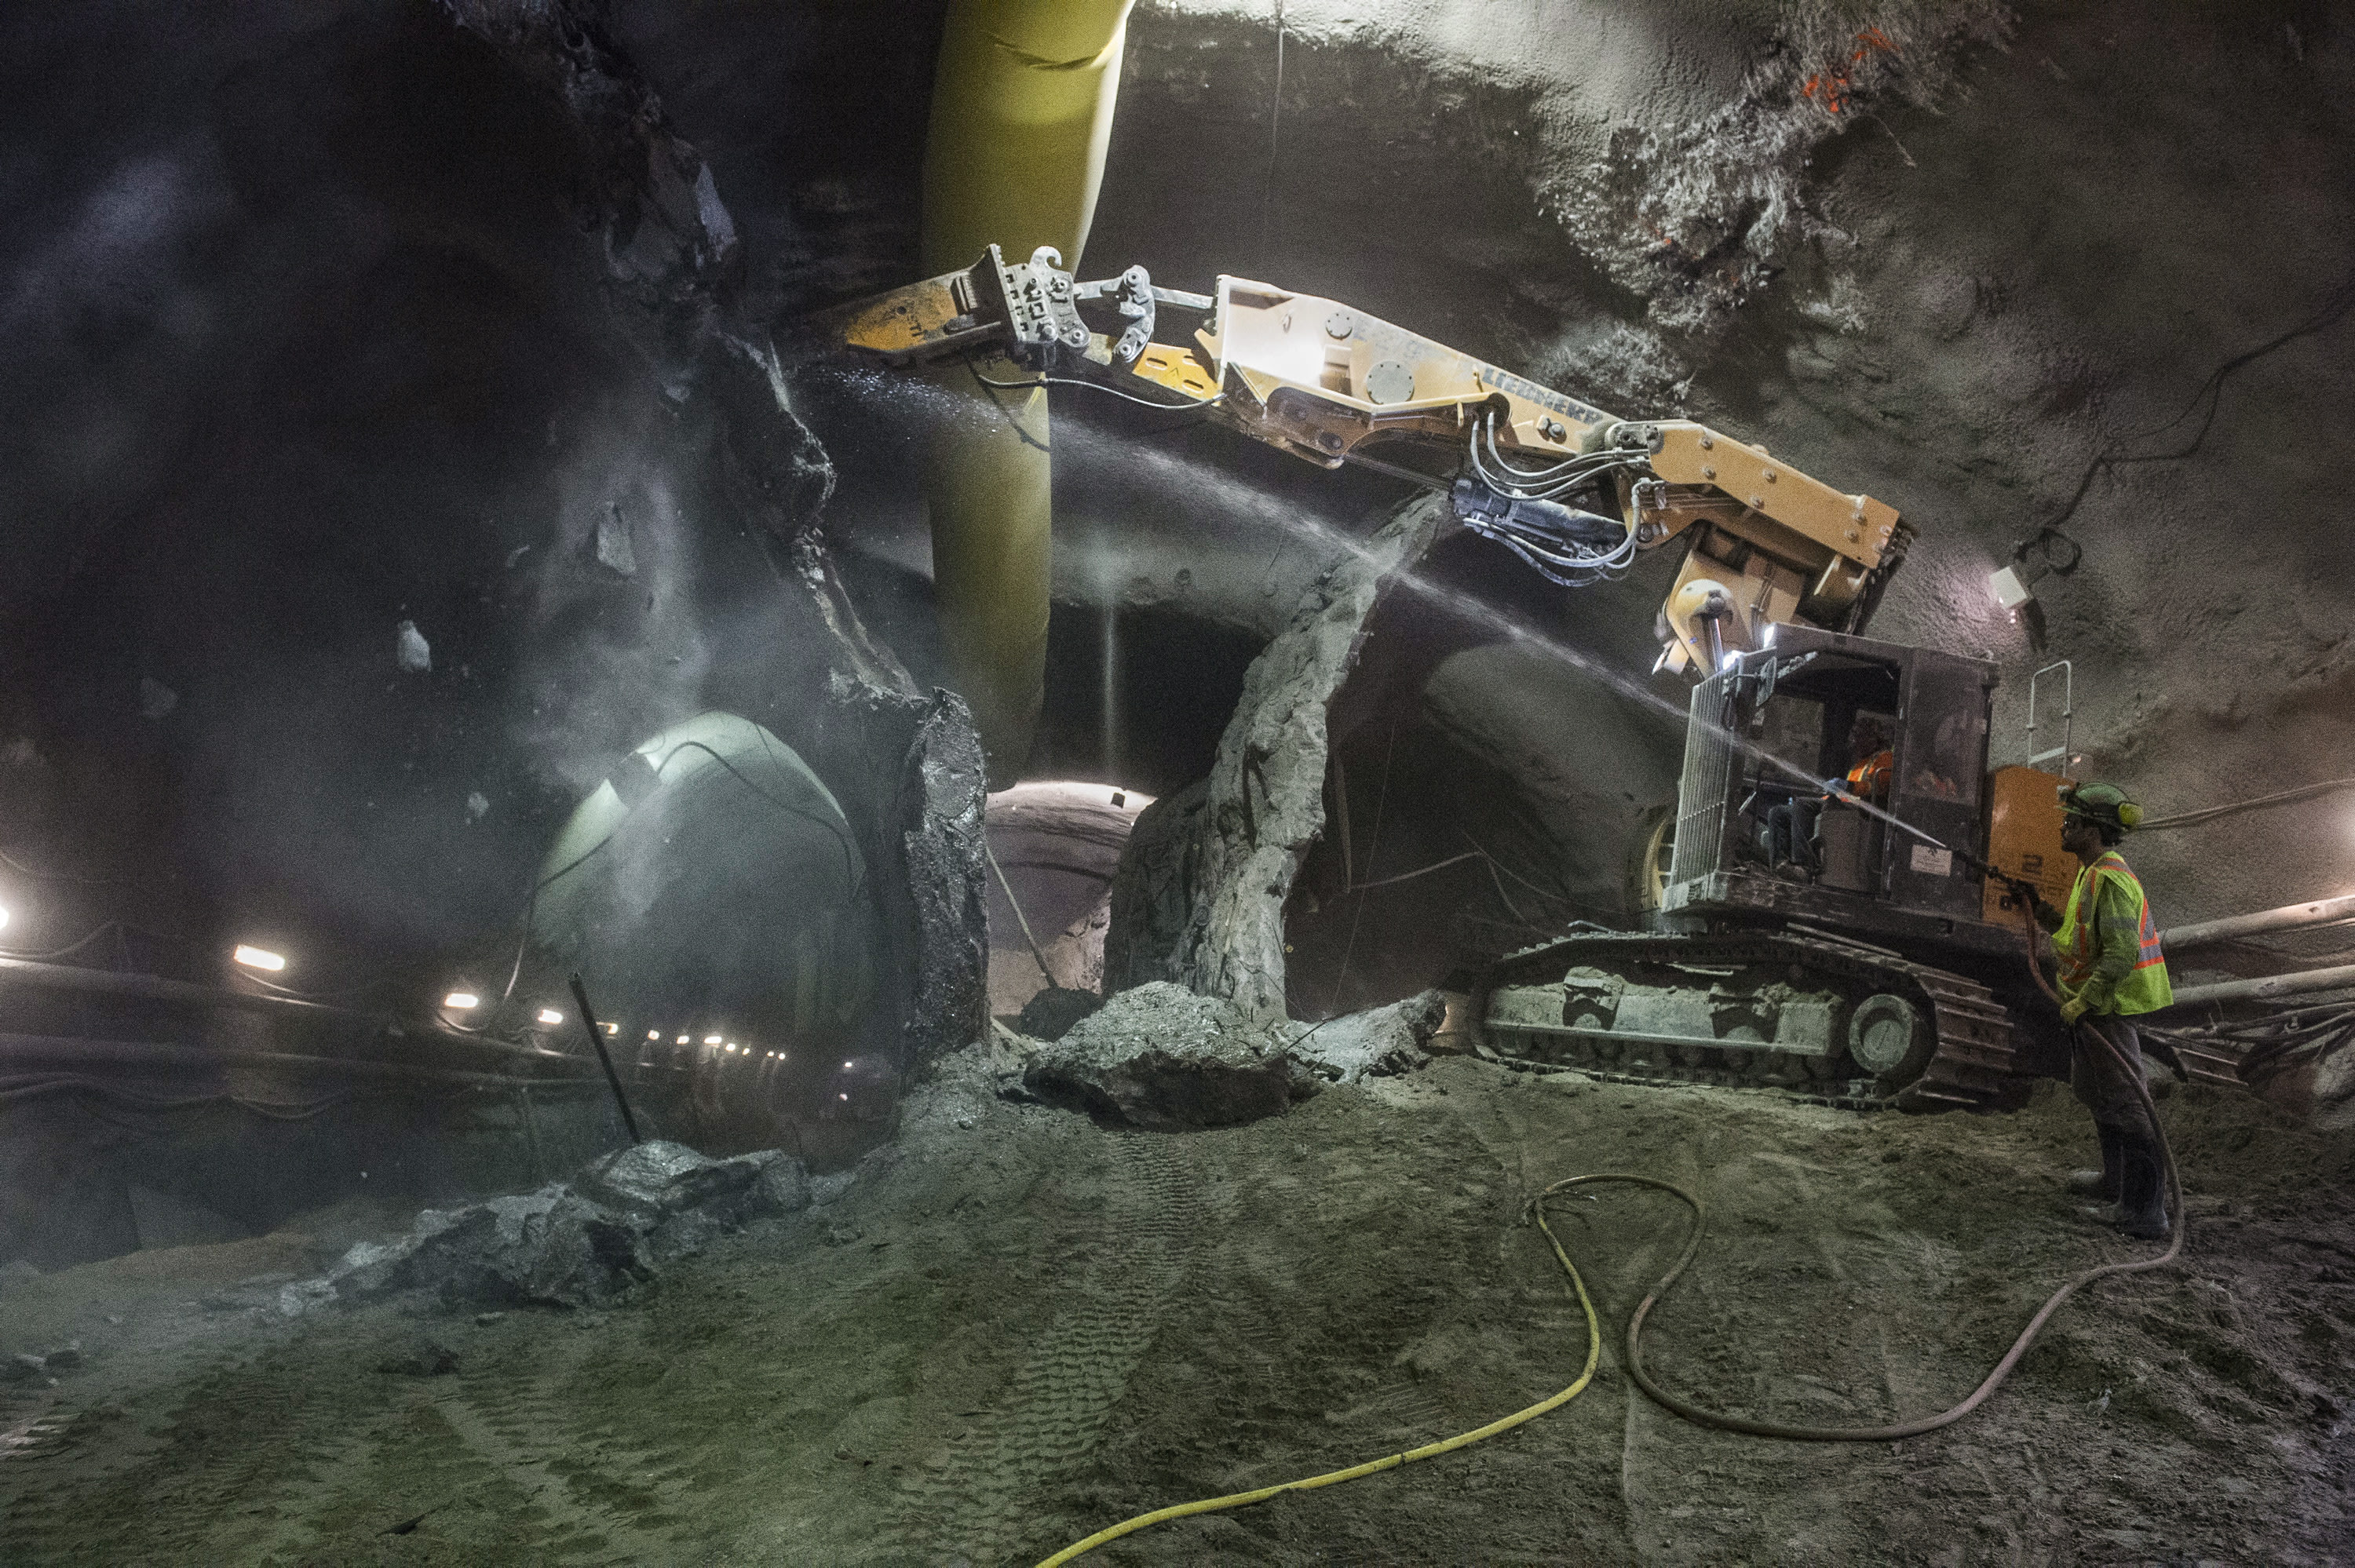 A crew member and digger chip away at rock and ground in a tunnel.